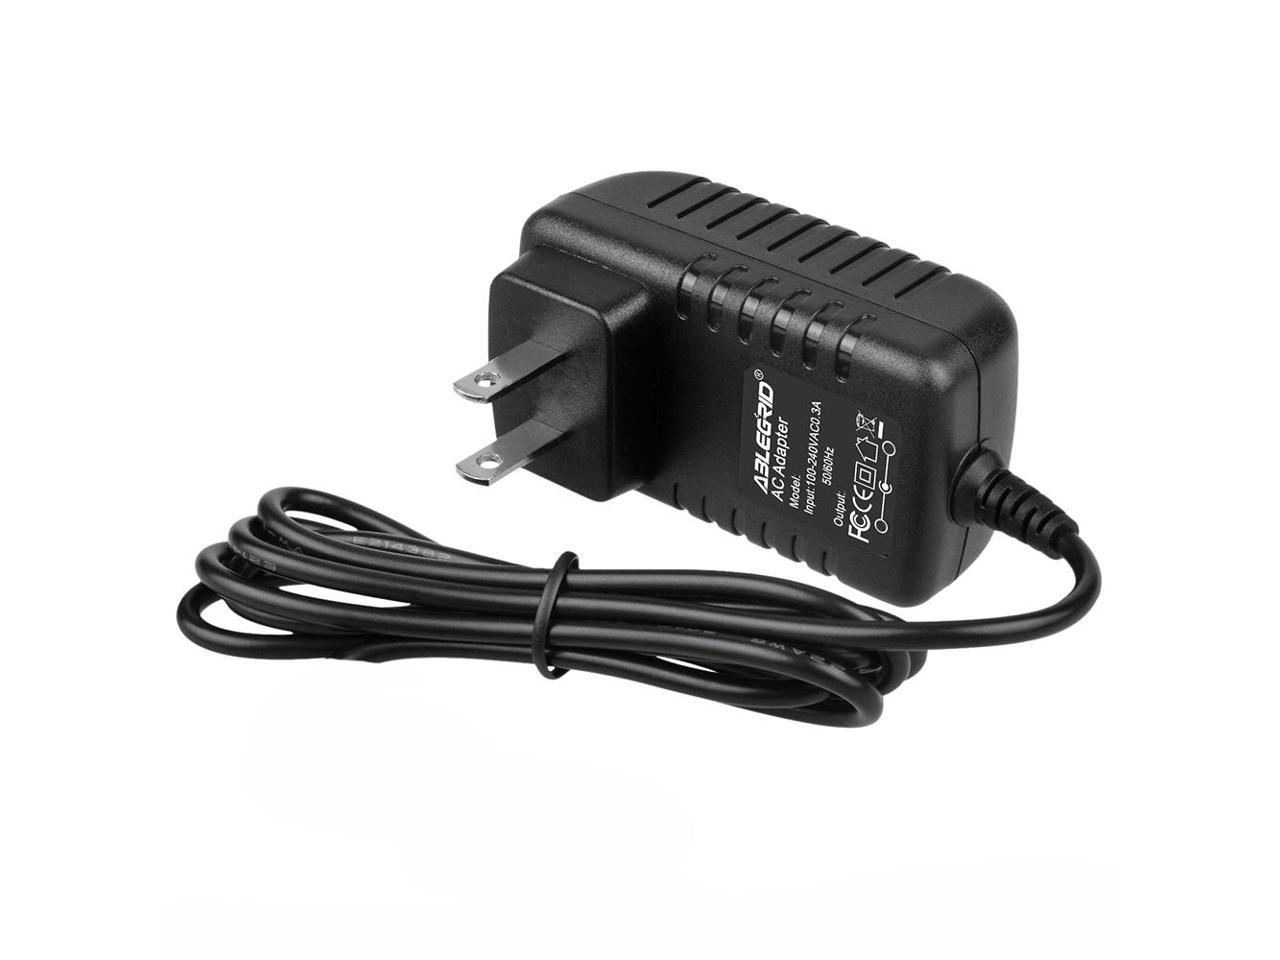 BRAND NEW Standby power adaptor for charger's Arlec E Saver 